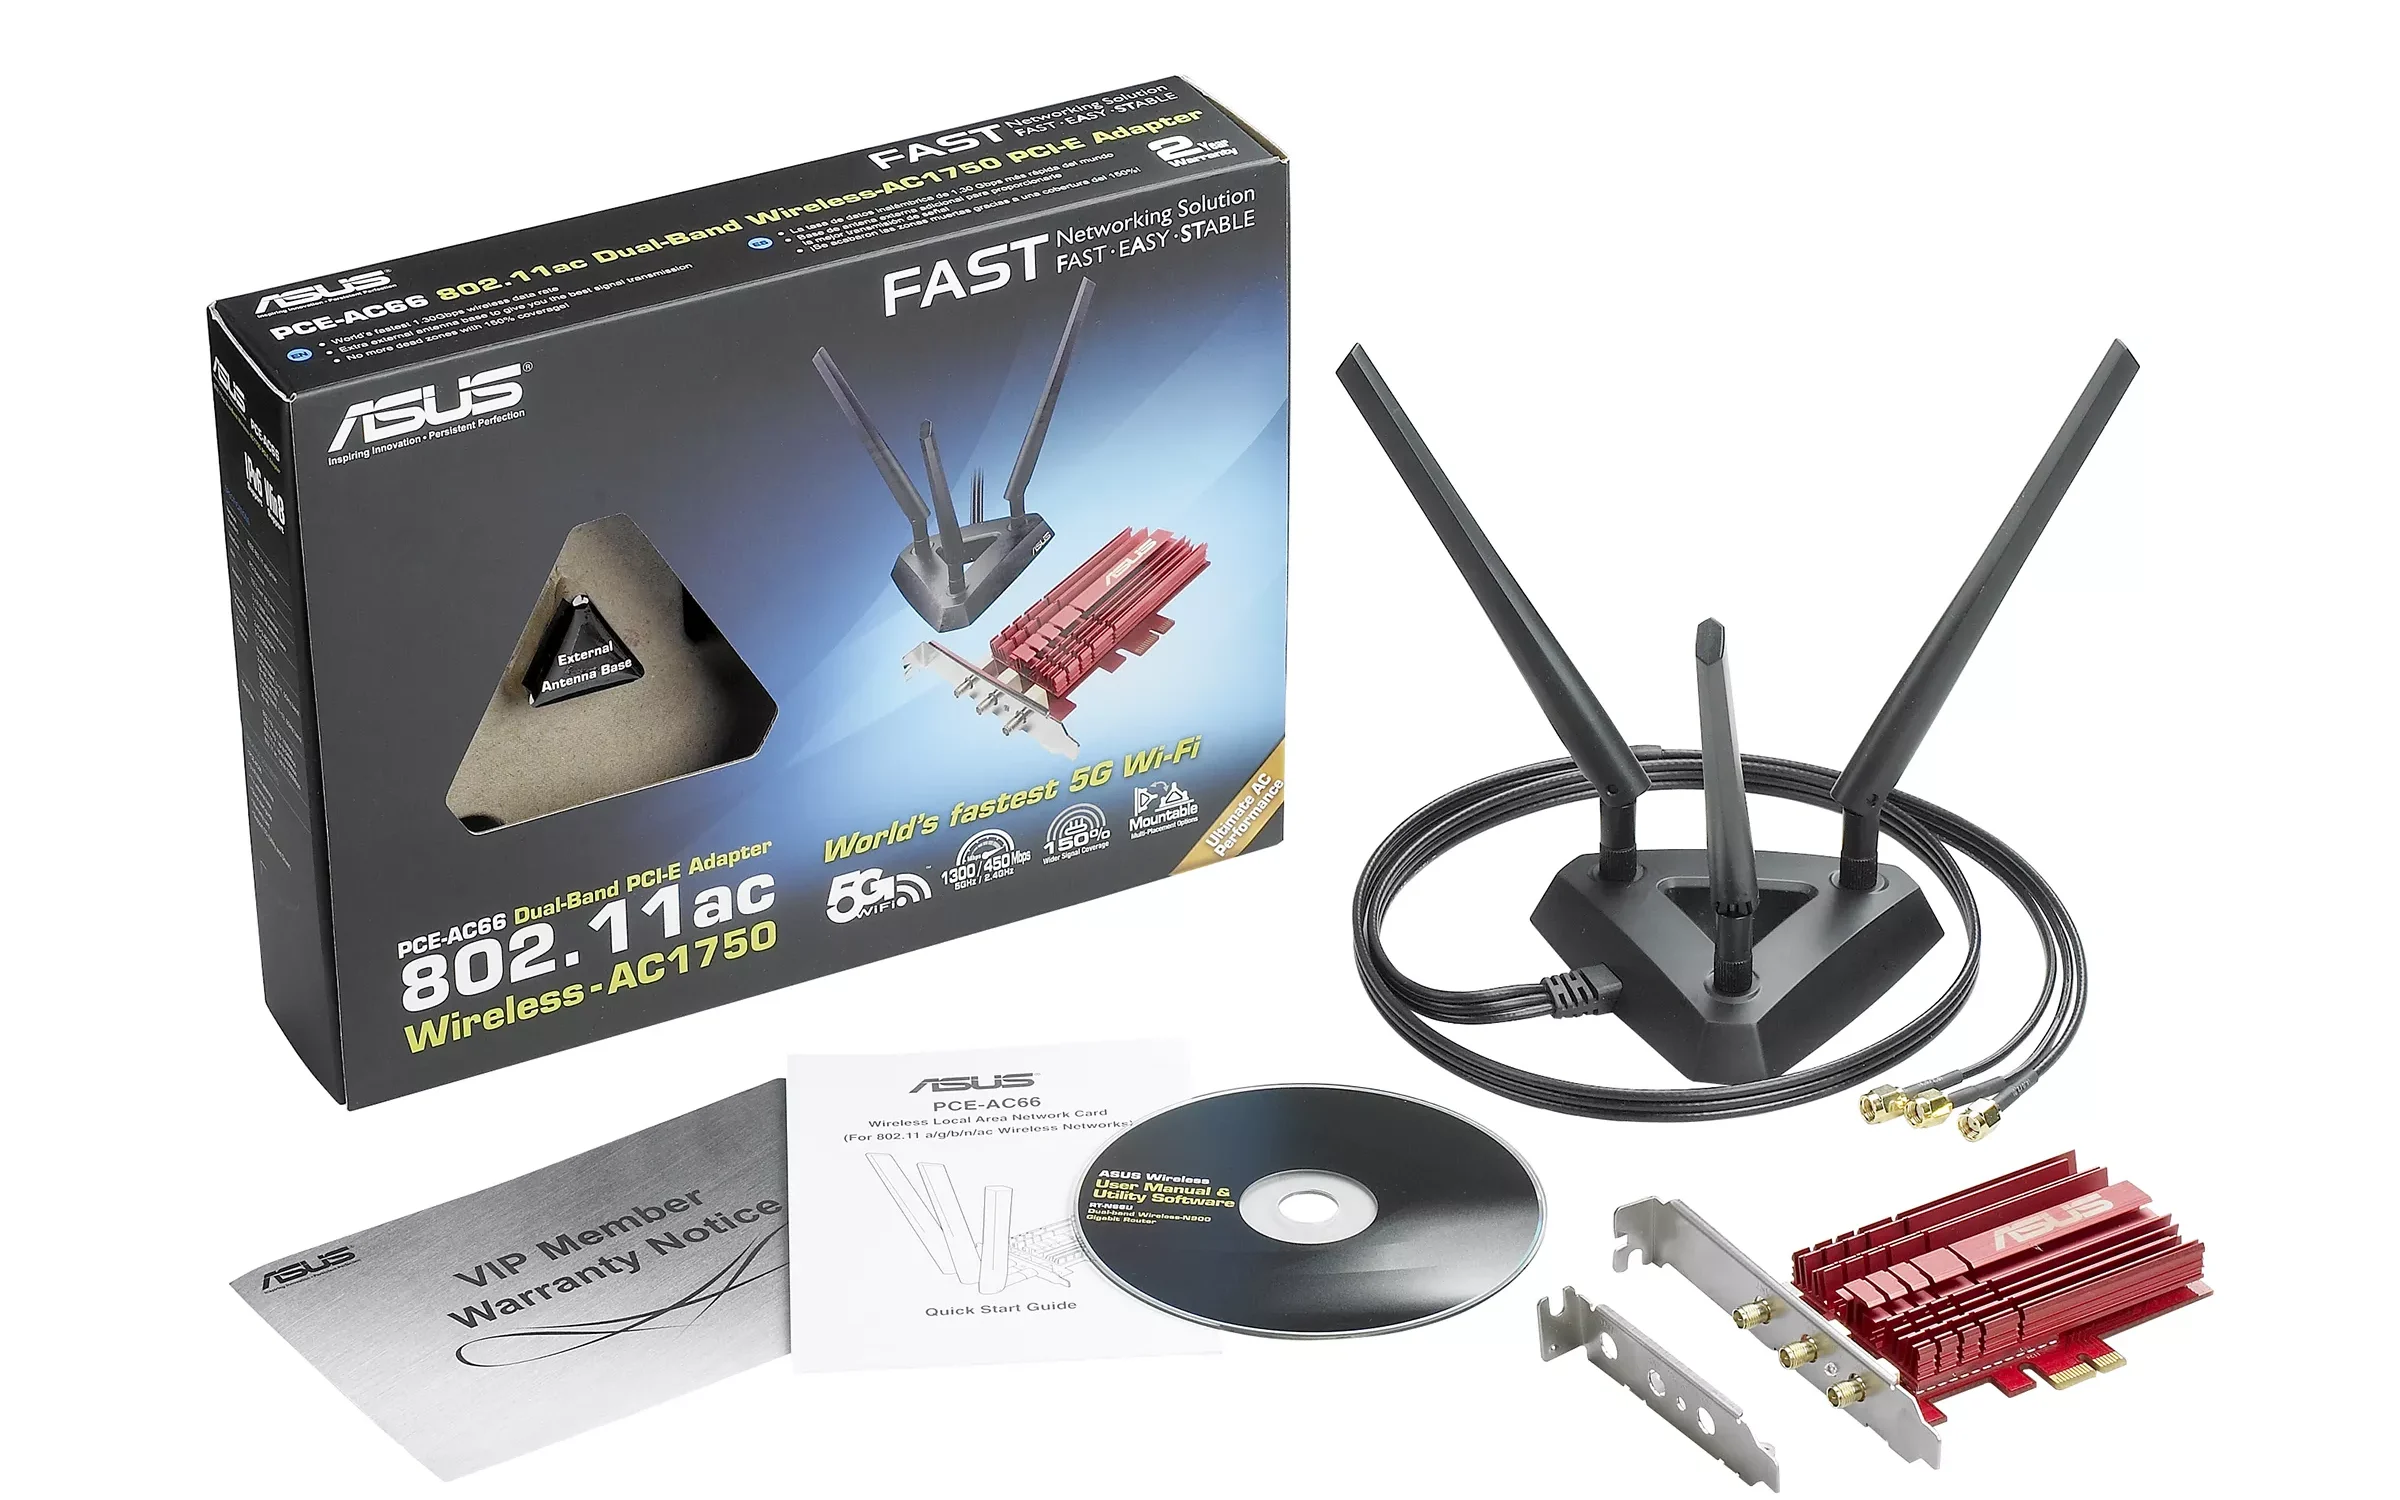 ASUS PCE-AC68 Box View